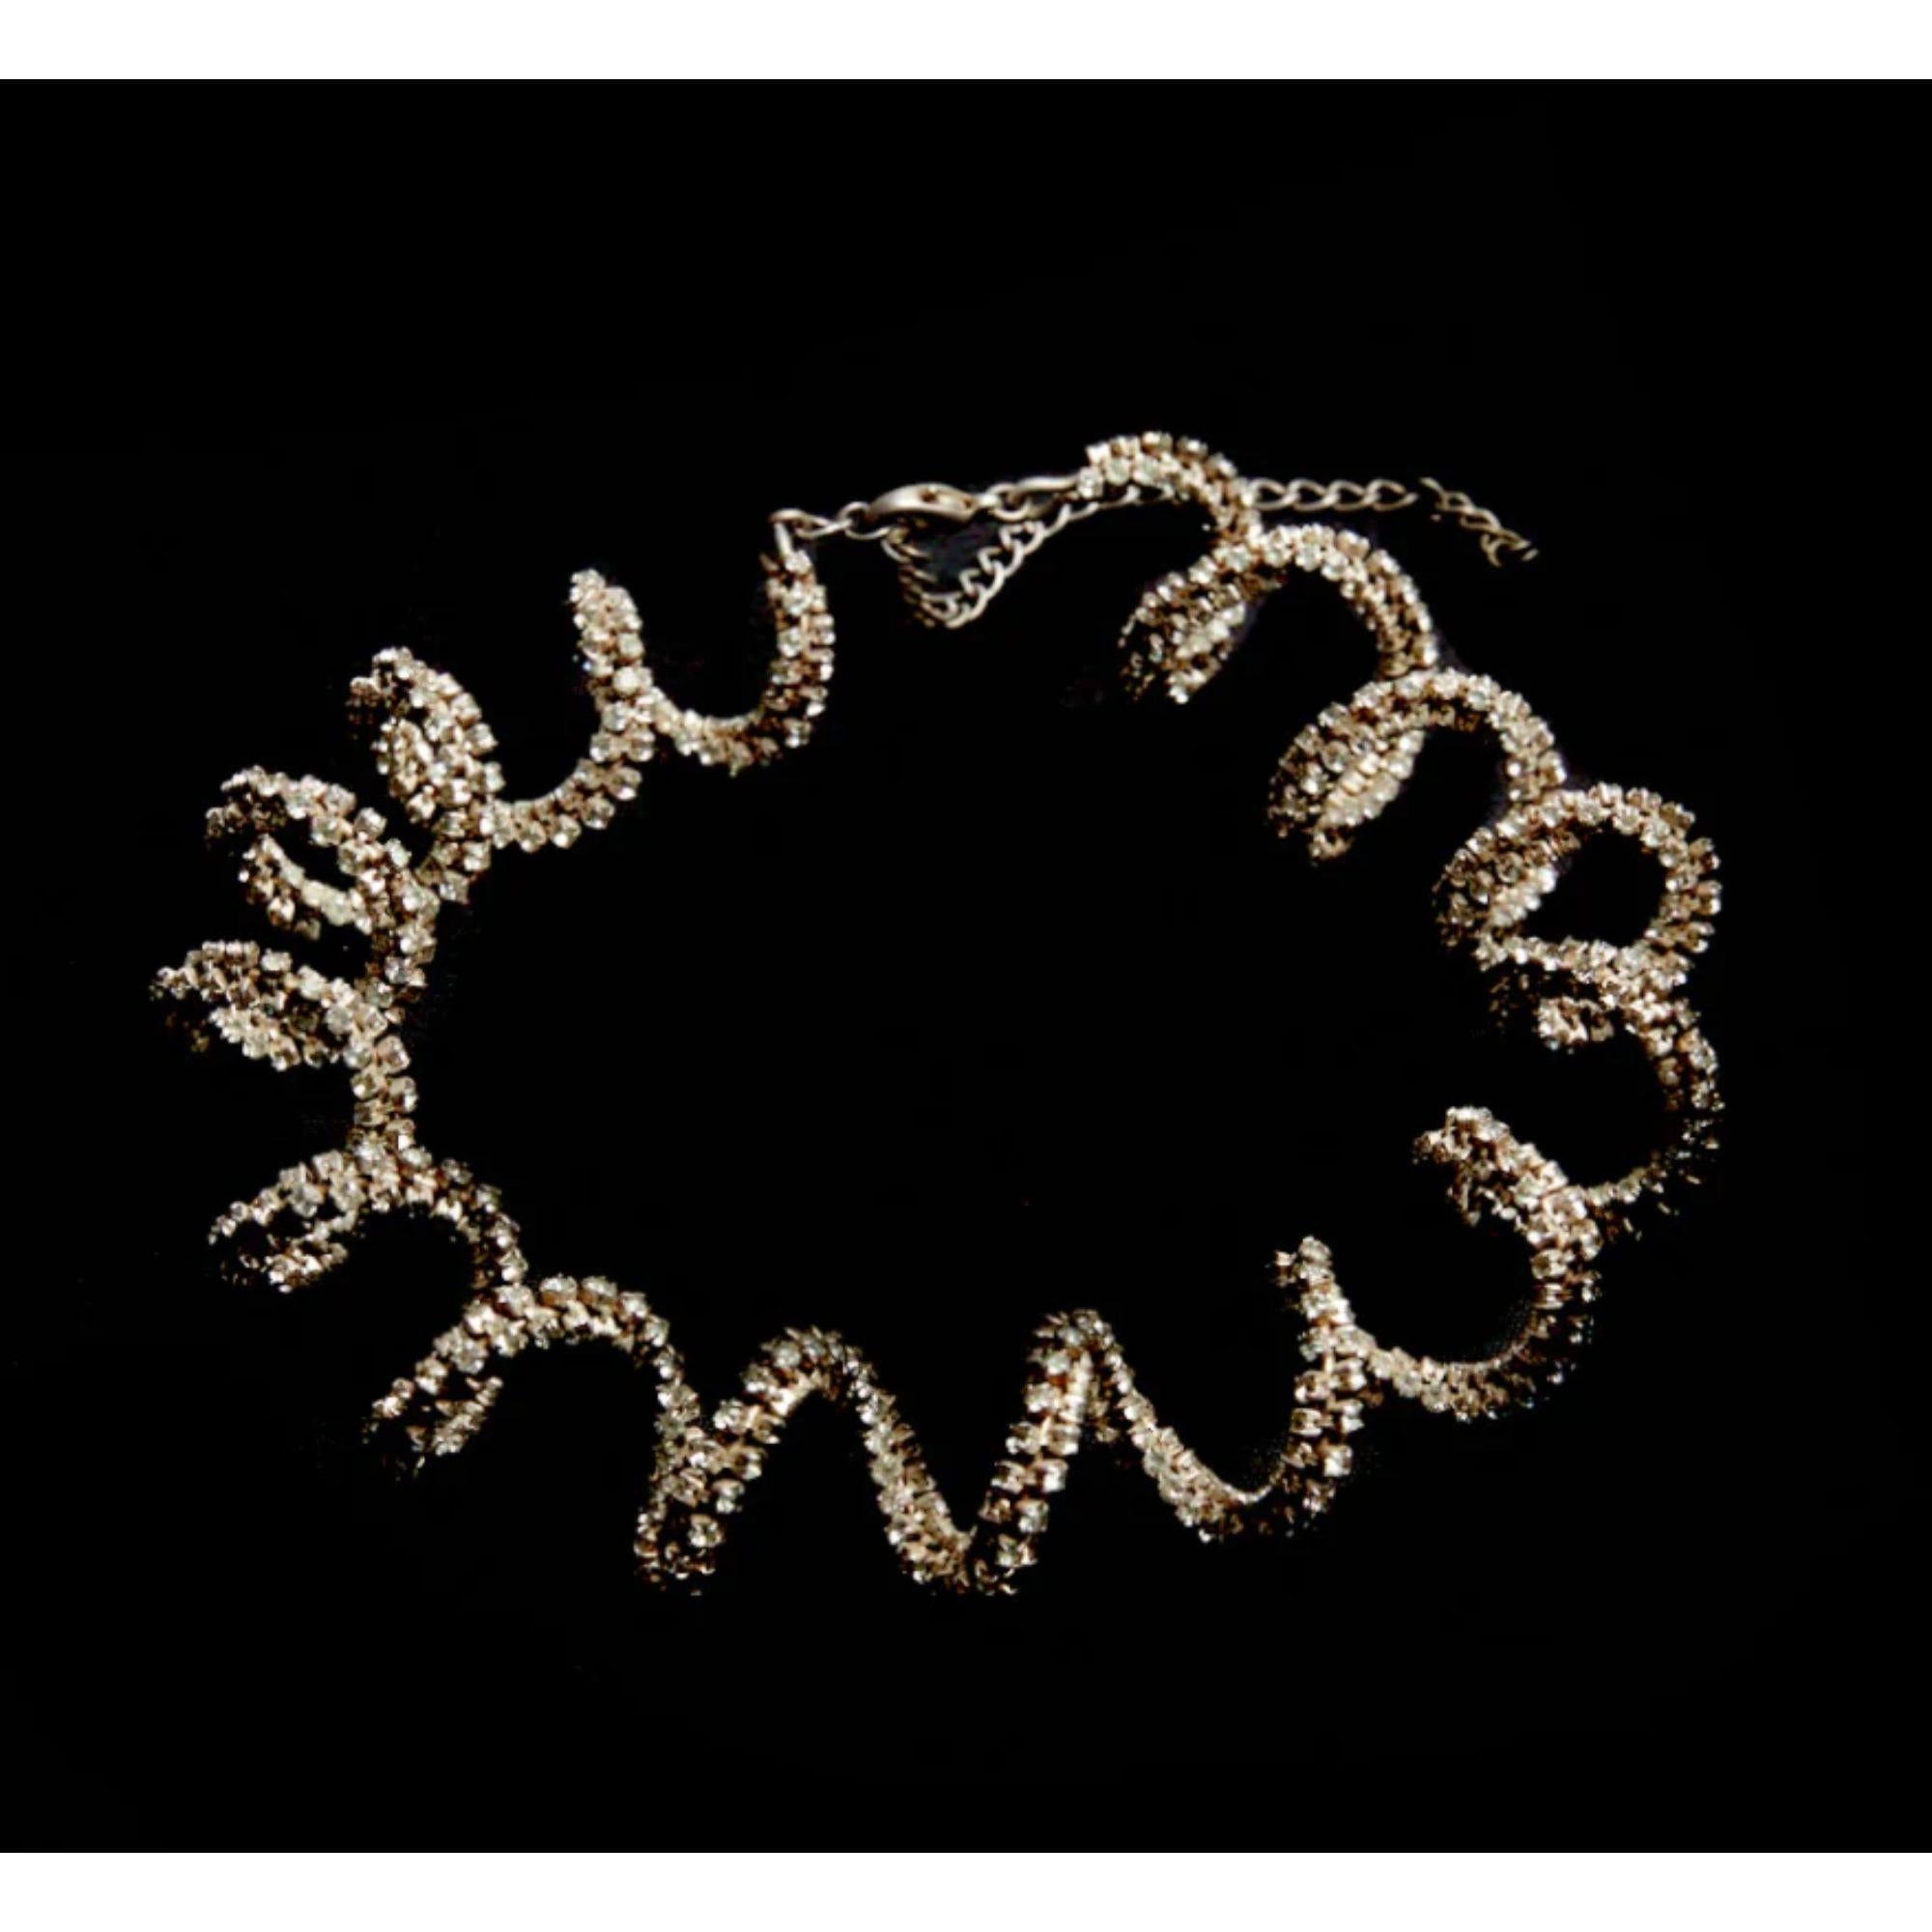 A playful necklace. Handmade and molded out of crystal rows in the shape of squiggles. Dipped in sterling silver. One of a kind.

Additional Information:
Material: Sterling silver